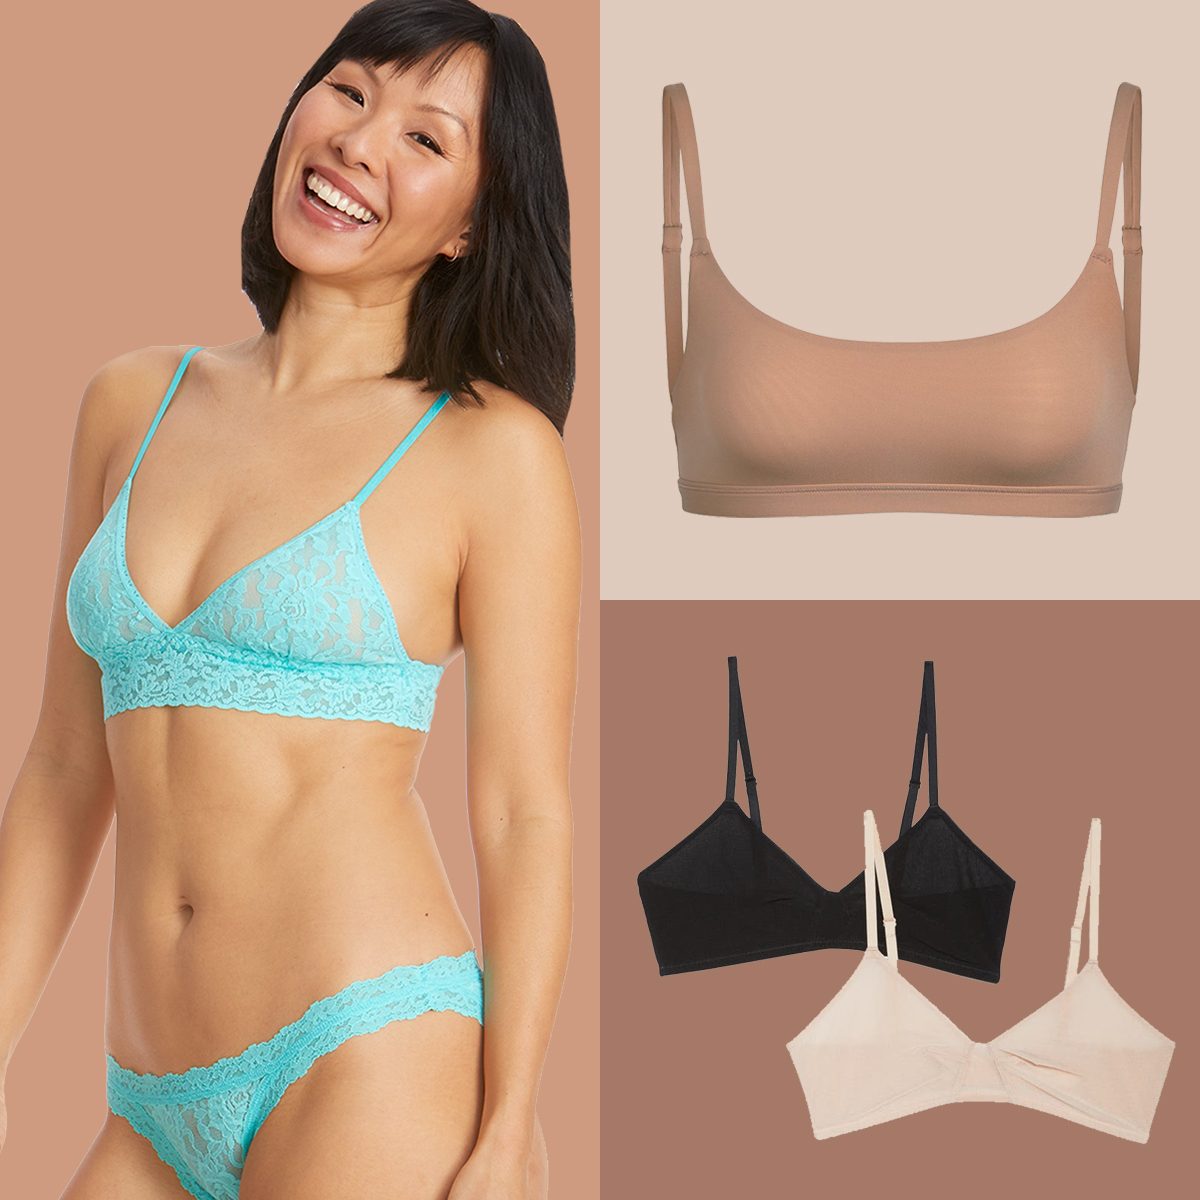 Shop Our Best Sellers in Bras and Shapewear from Spanx, Hanky Panky, and  Commando - In The Mood Intimates - In the Mood Intimates